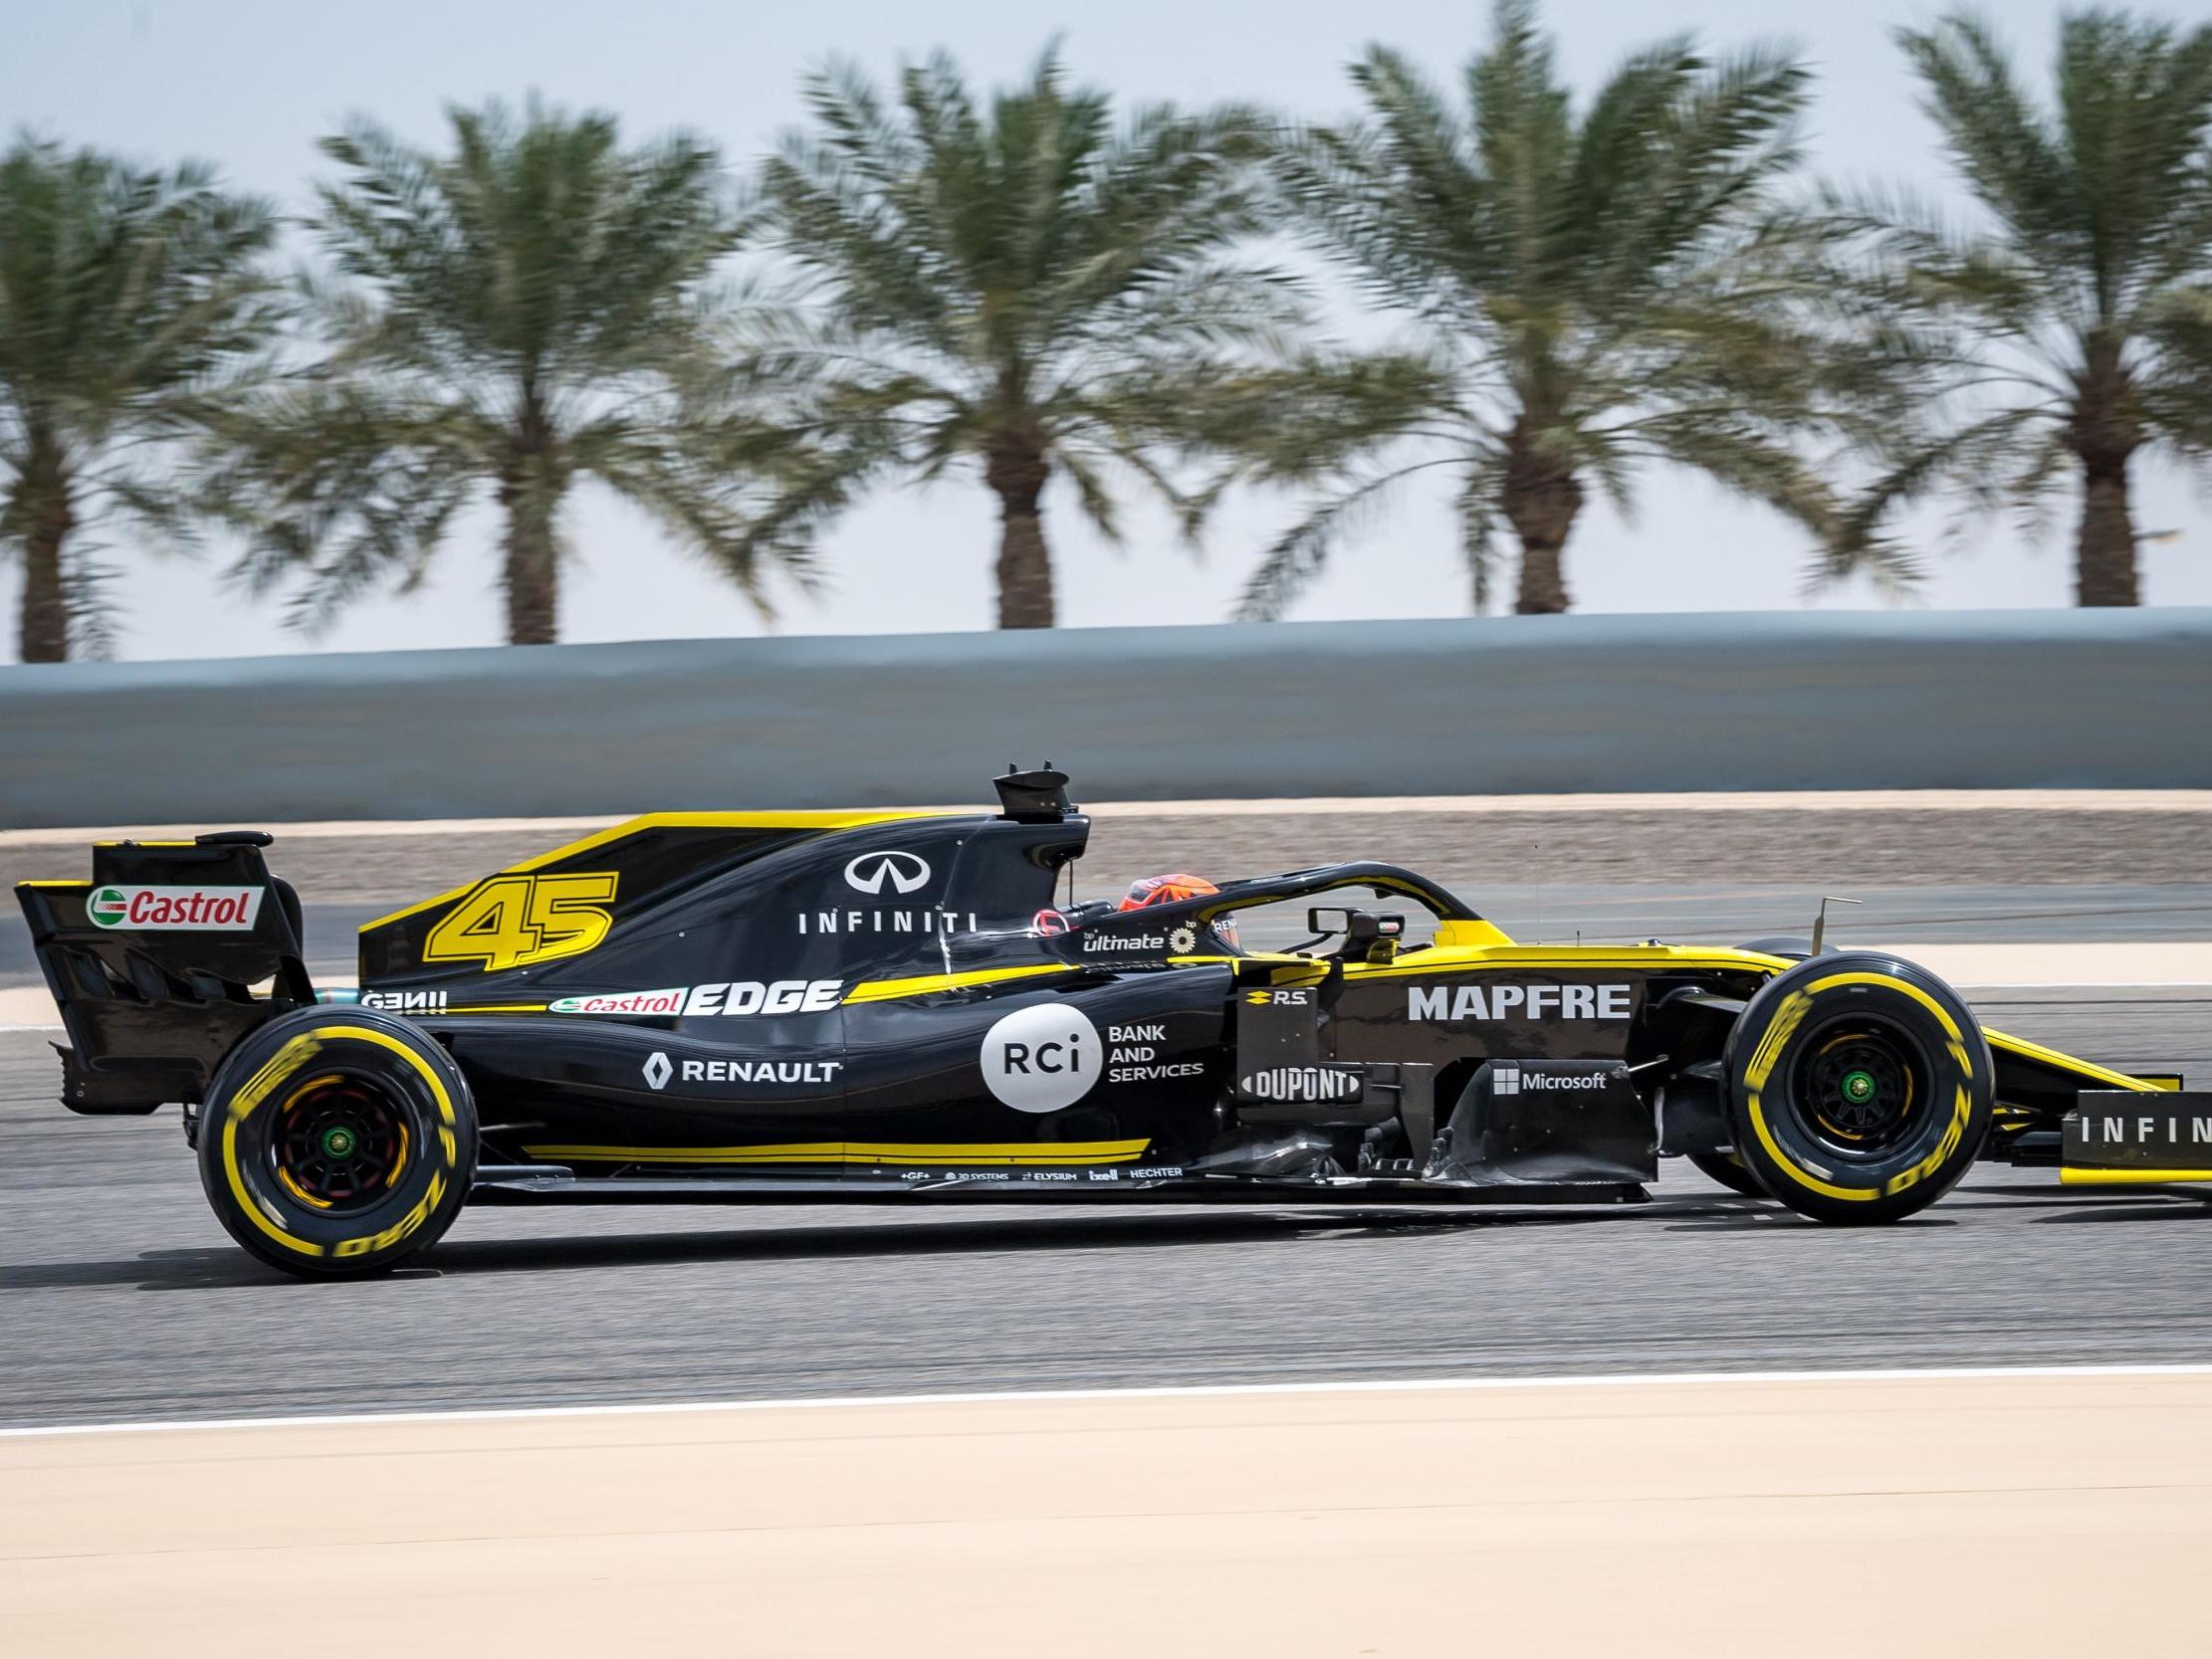 Aitken is in his fourth year with Renault's development programme